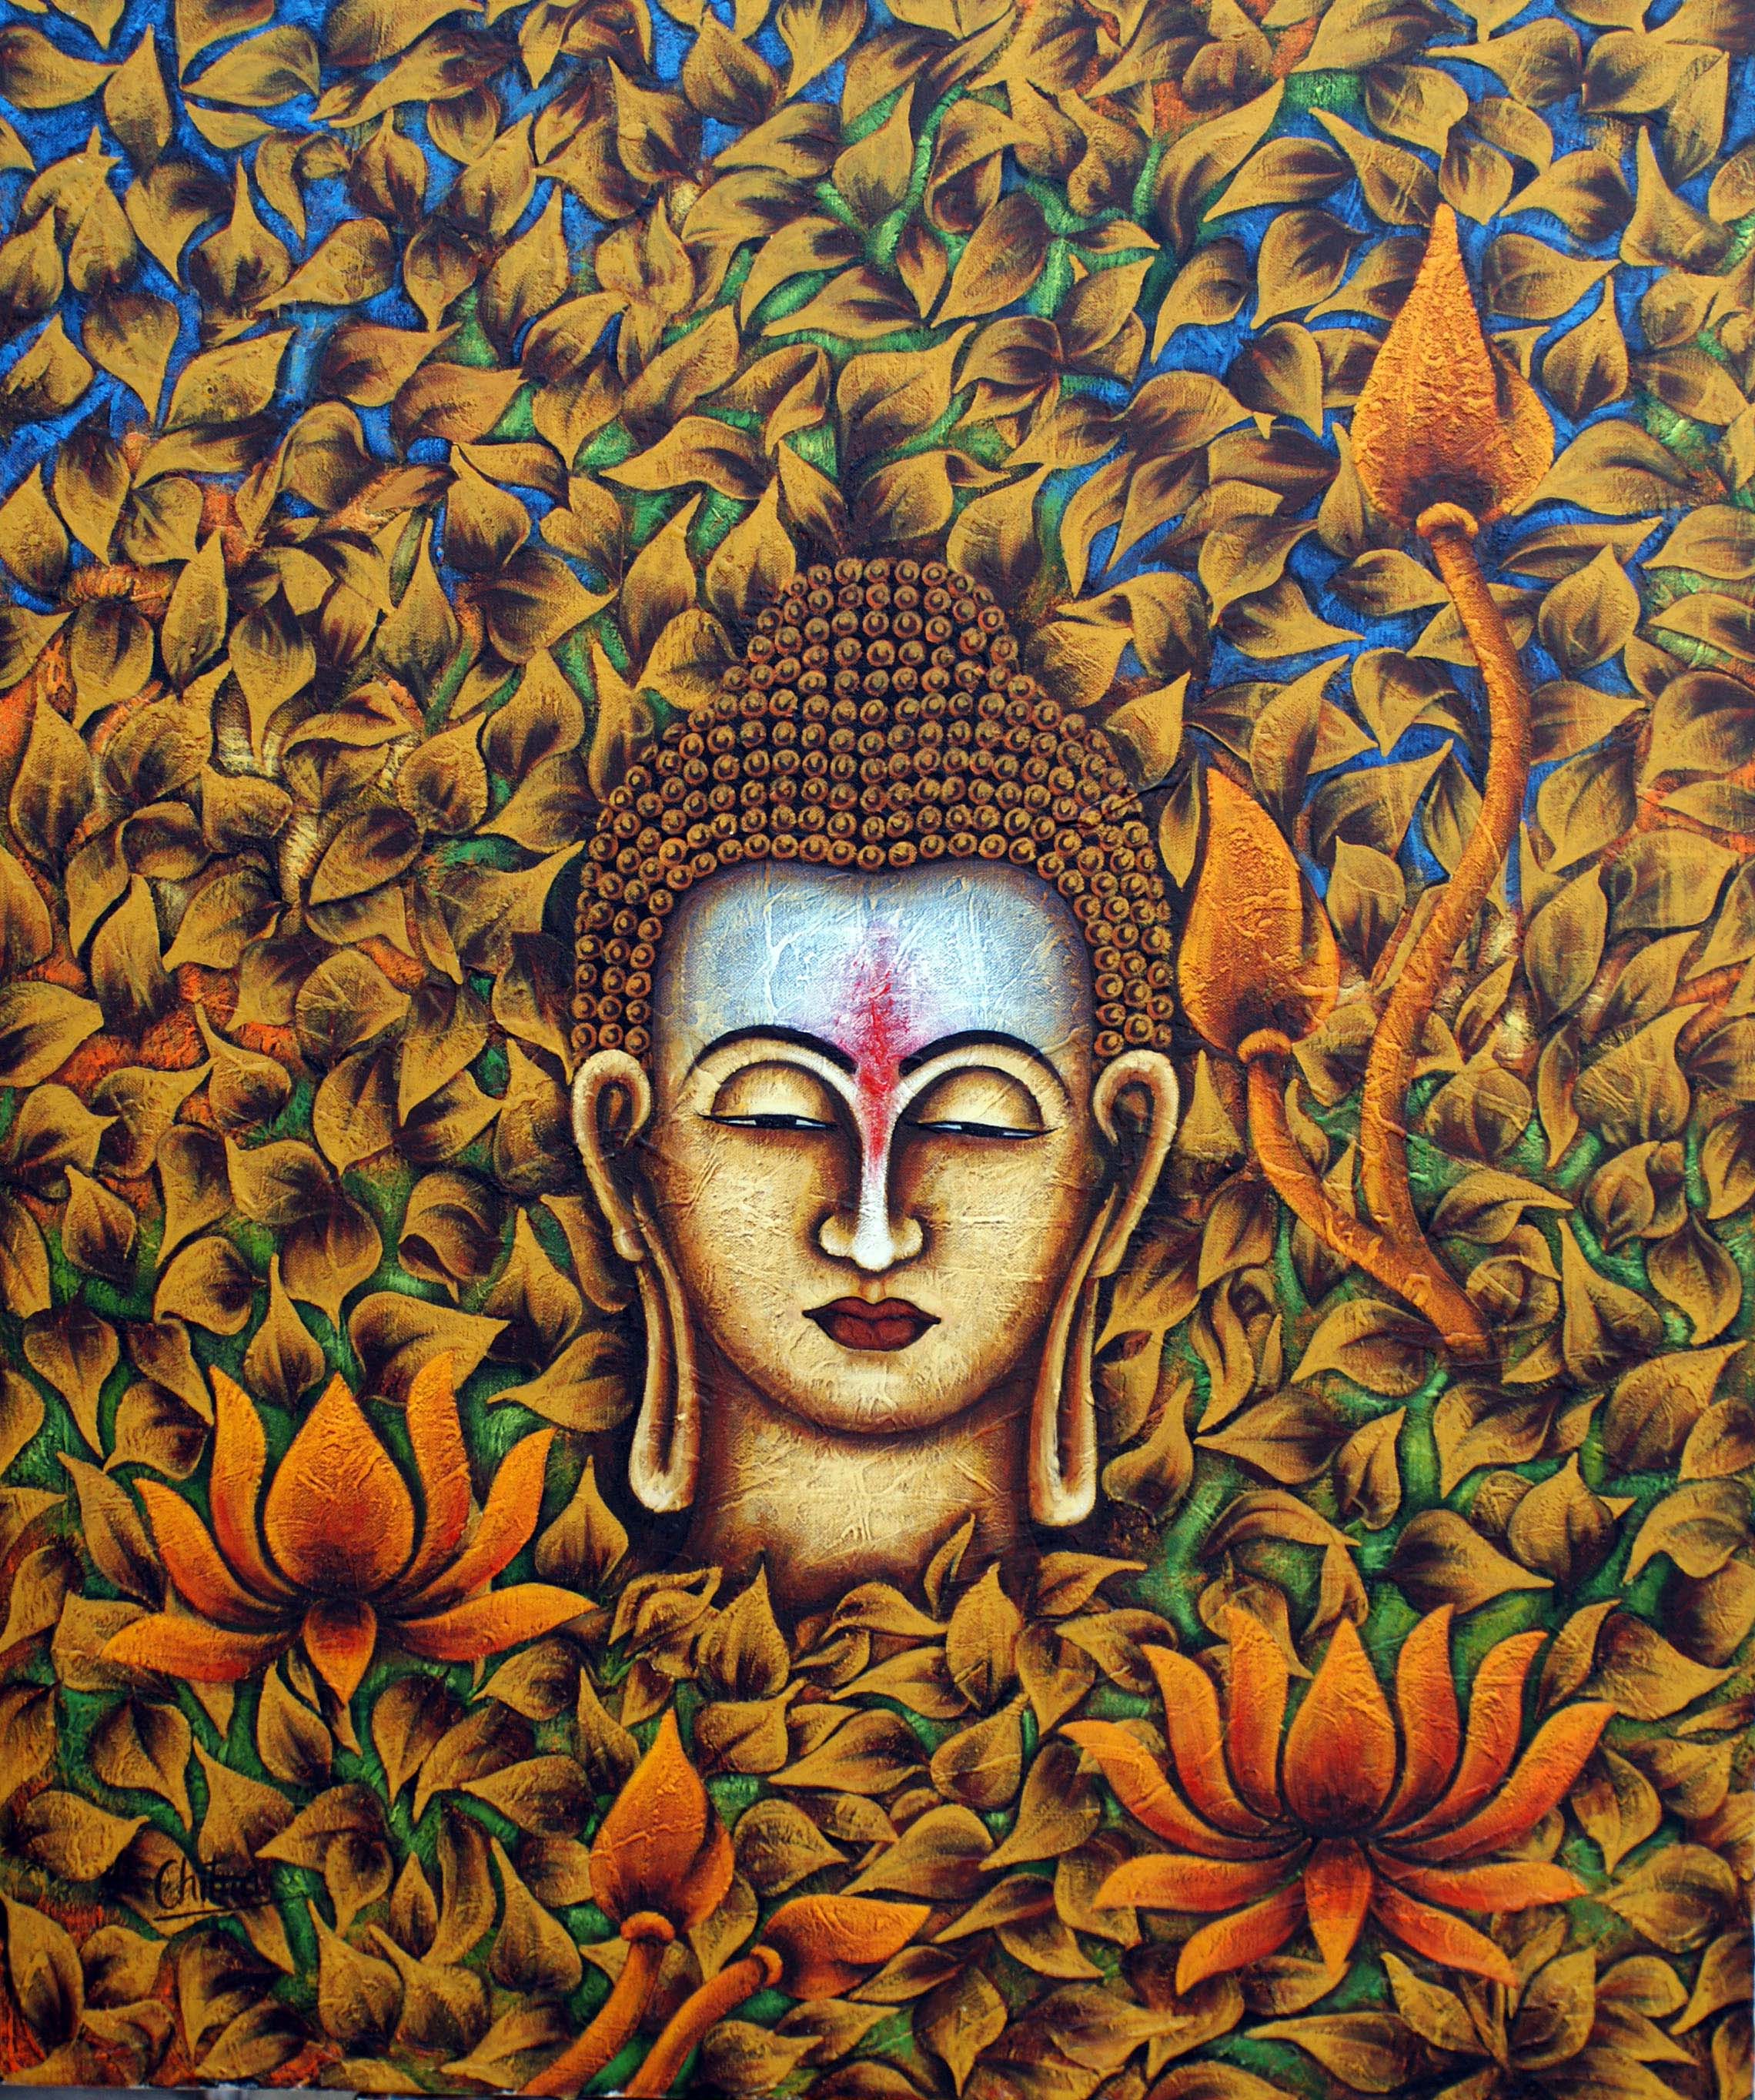 http://us-indiaartculturecenter.org/ProductGallery/1-250/96/30X36INCH,TITLE%E2%80%93LORDBUDDHAMUDEIM-ACRYLICONCANVAS.JPG